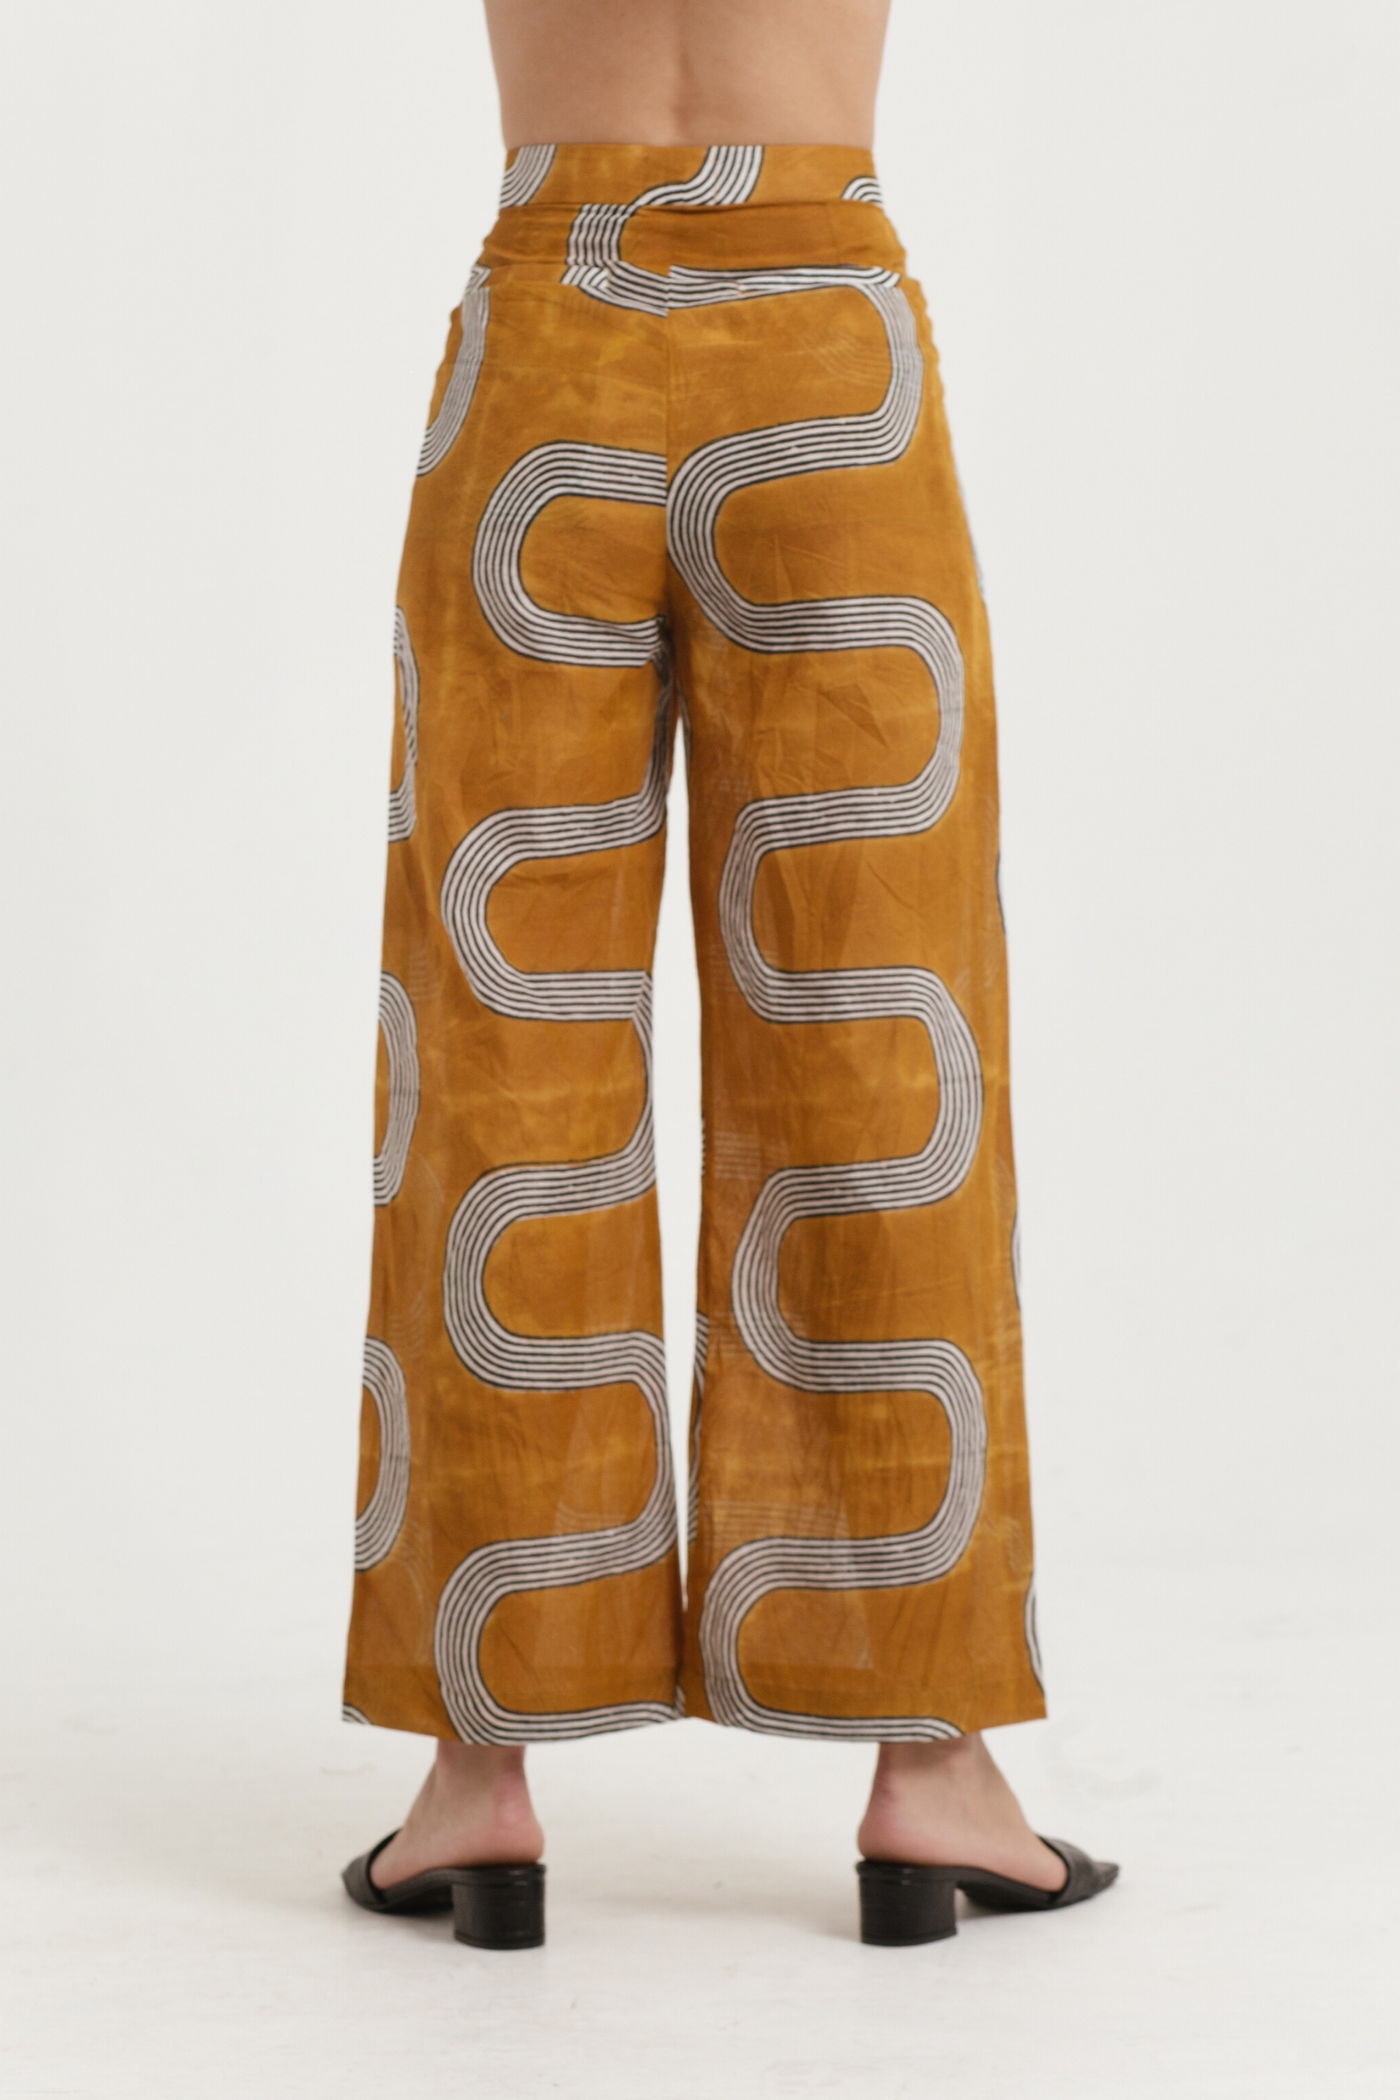 Stain Canyon Pants in Tigris, available on ZERRIN with free Singapore shipping